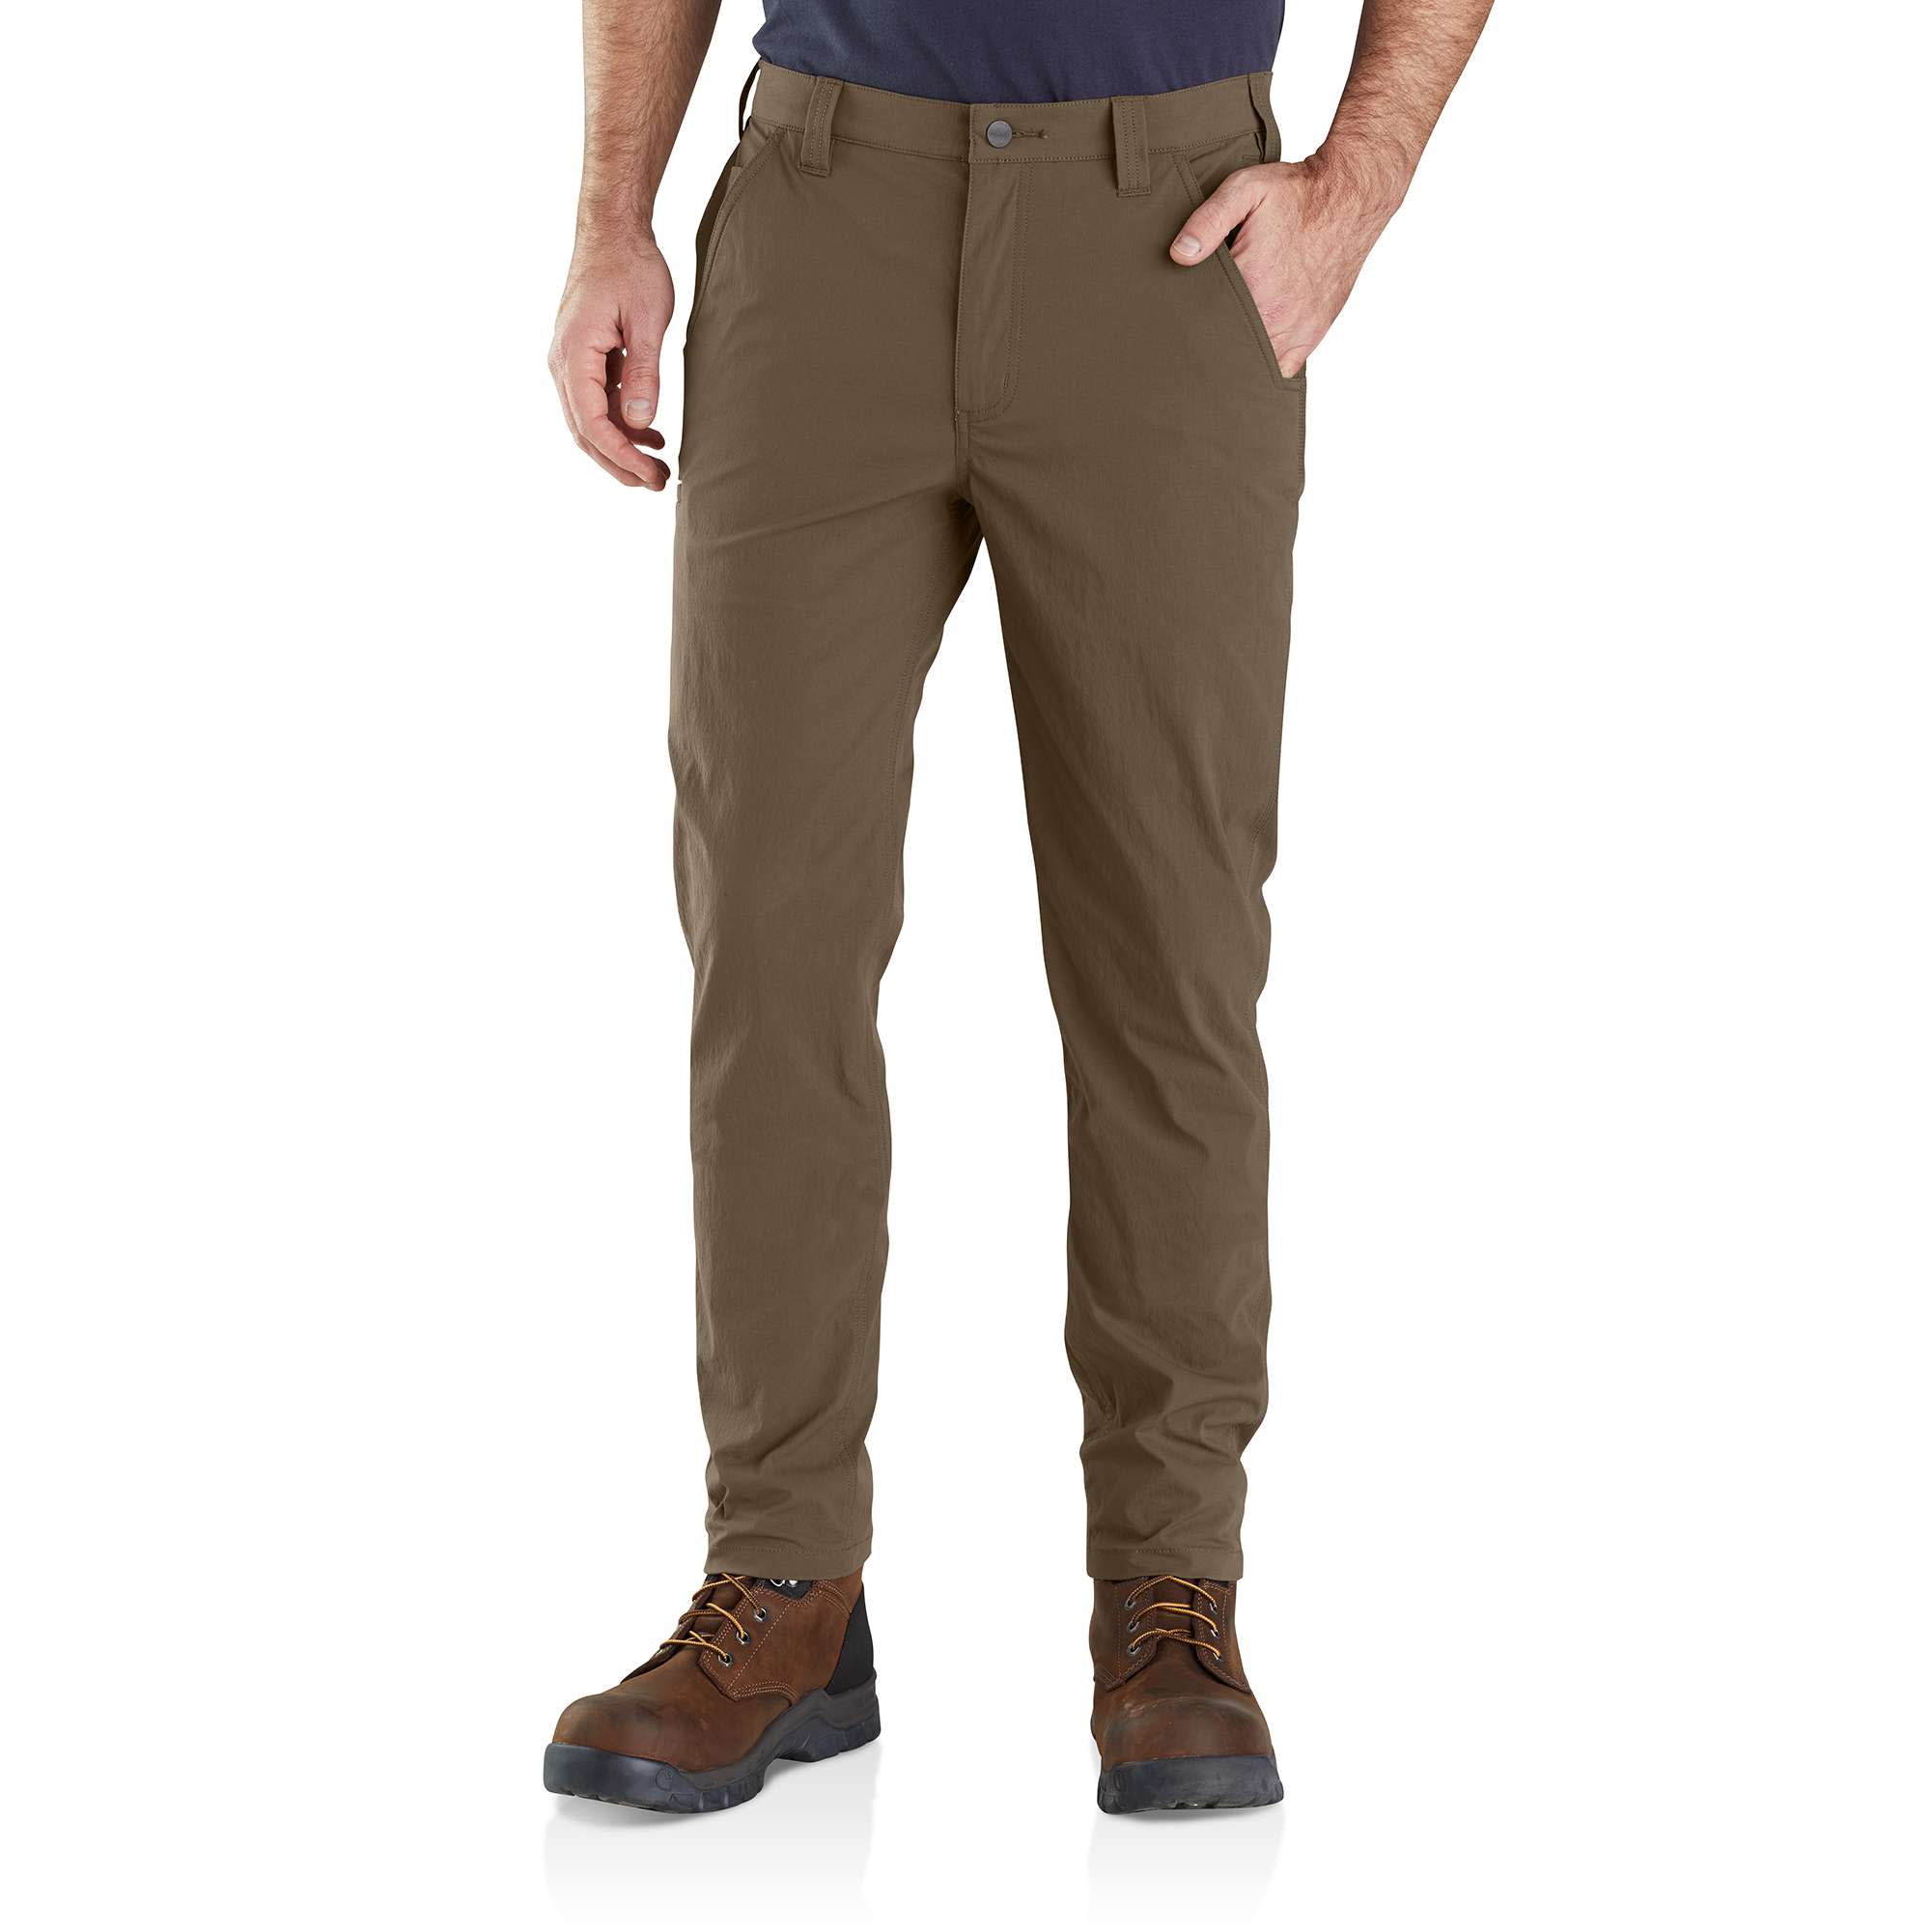 CARHARTT 105461 - Rugged Flex Relaxed Fit Ripstop Cargo Work Pant